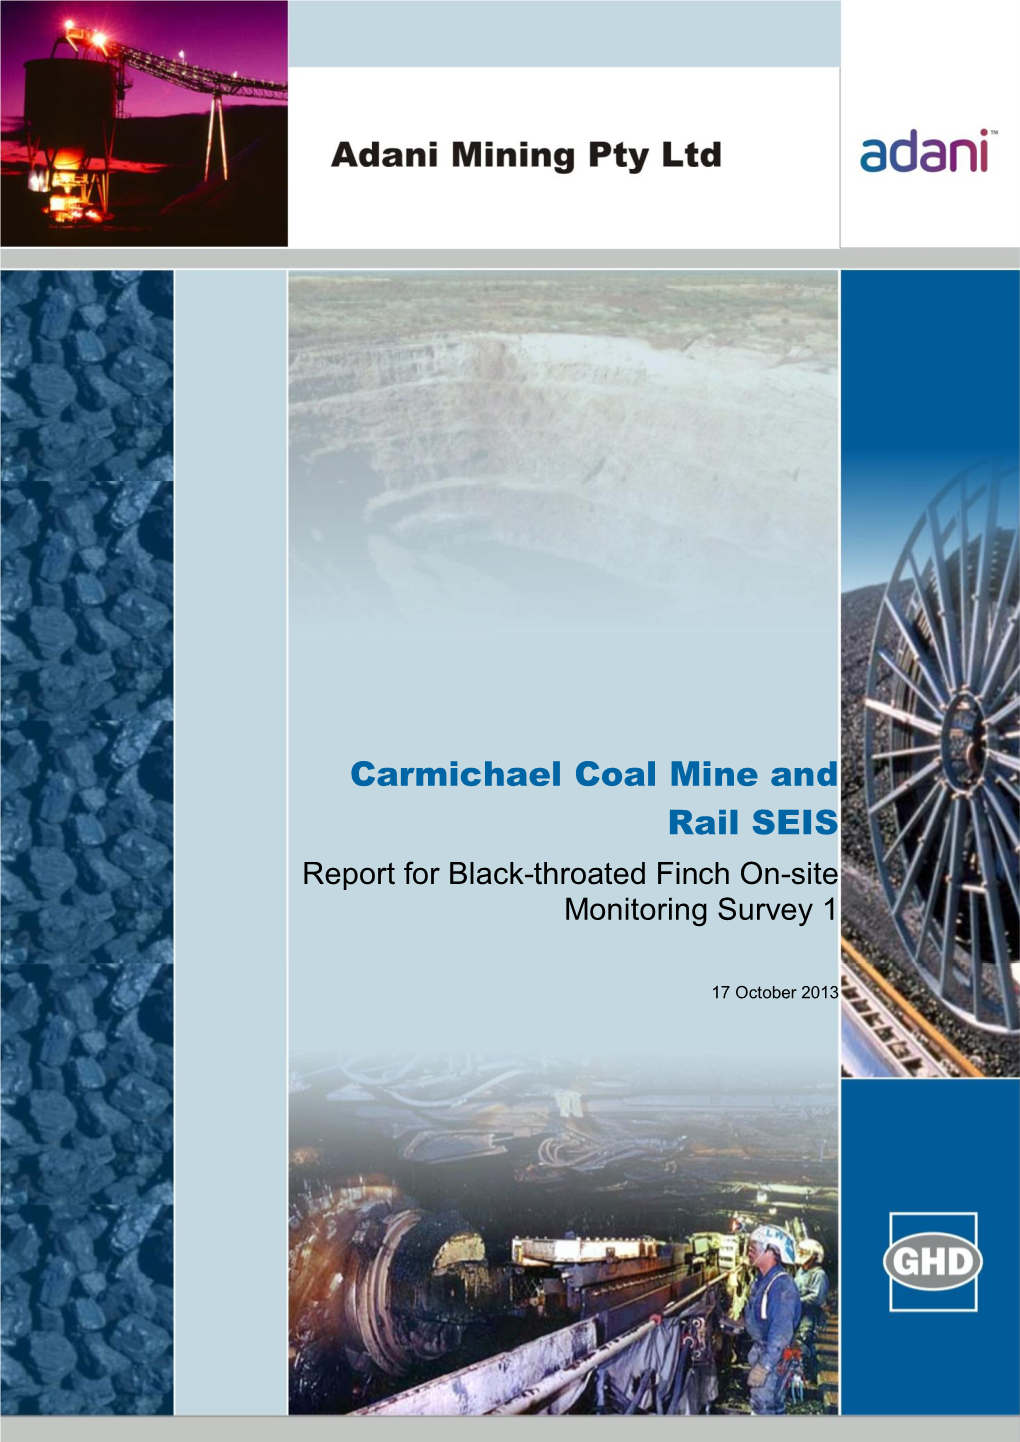 Carmichael Coal Mine and Rail SEIS Report for Black-Throated Finch On-Site Monitoring Survey 1